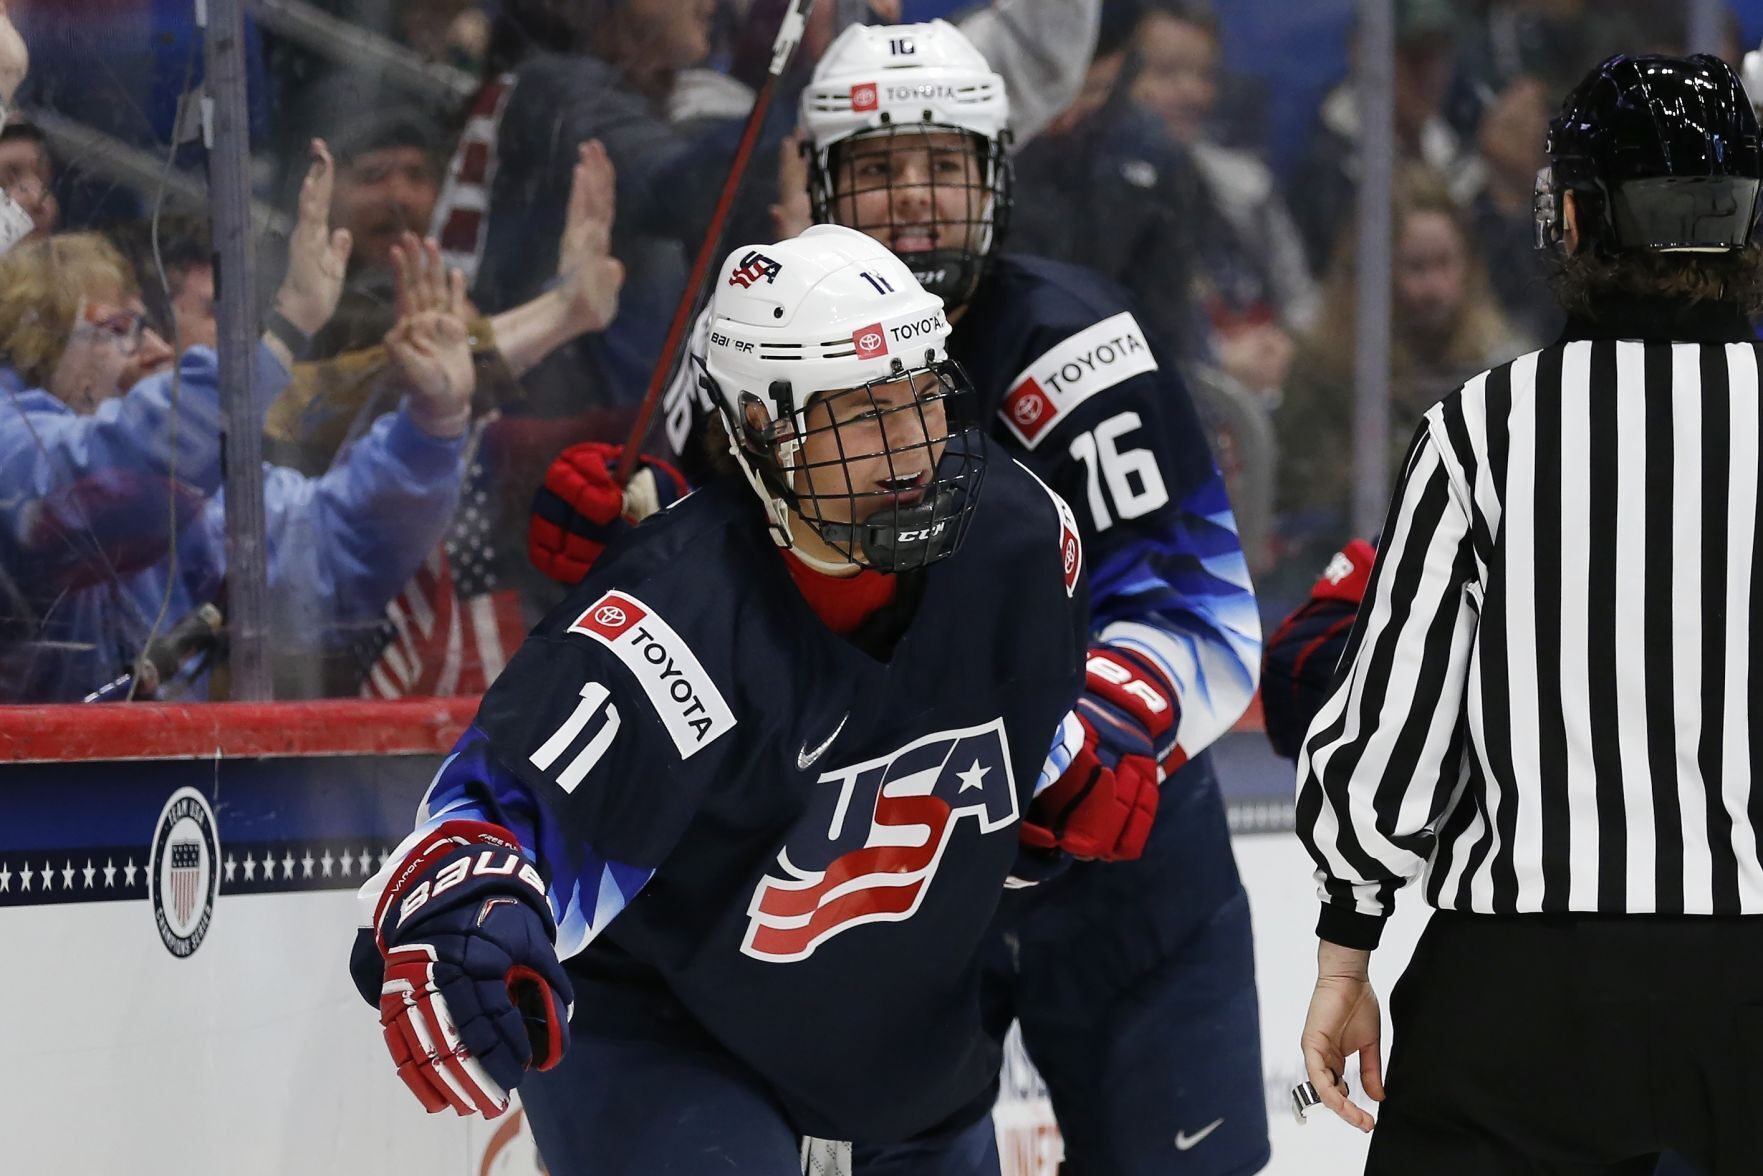 Heres how to watch 13 Badgers players at the womens hockey world championship